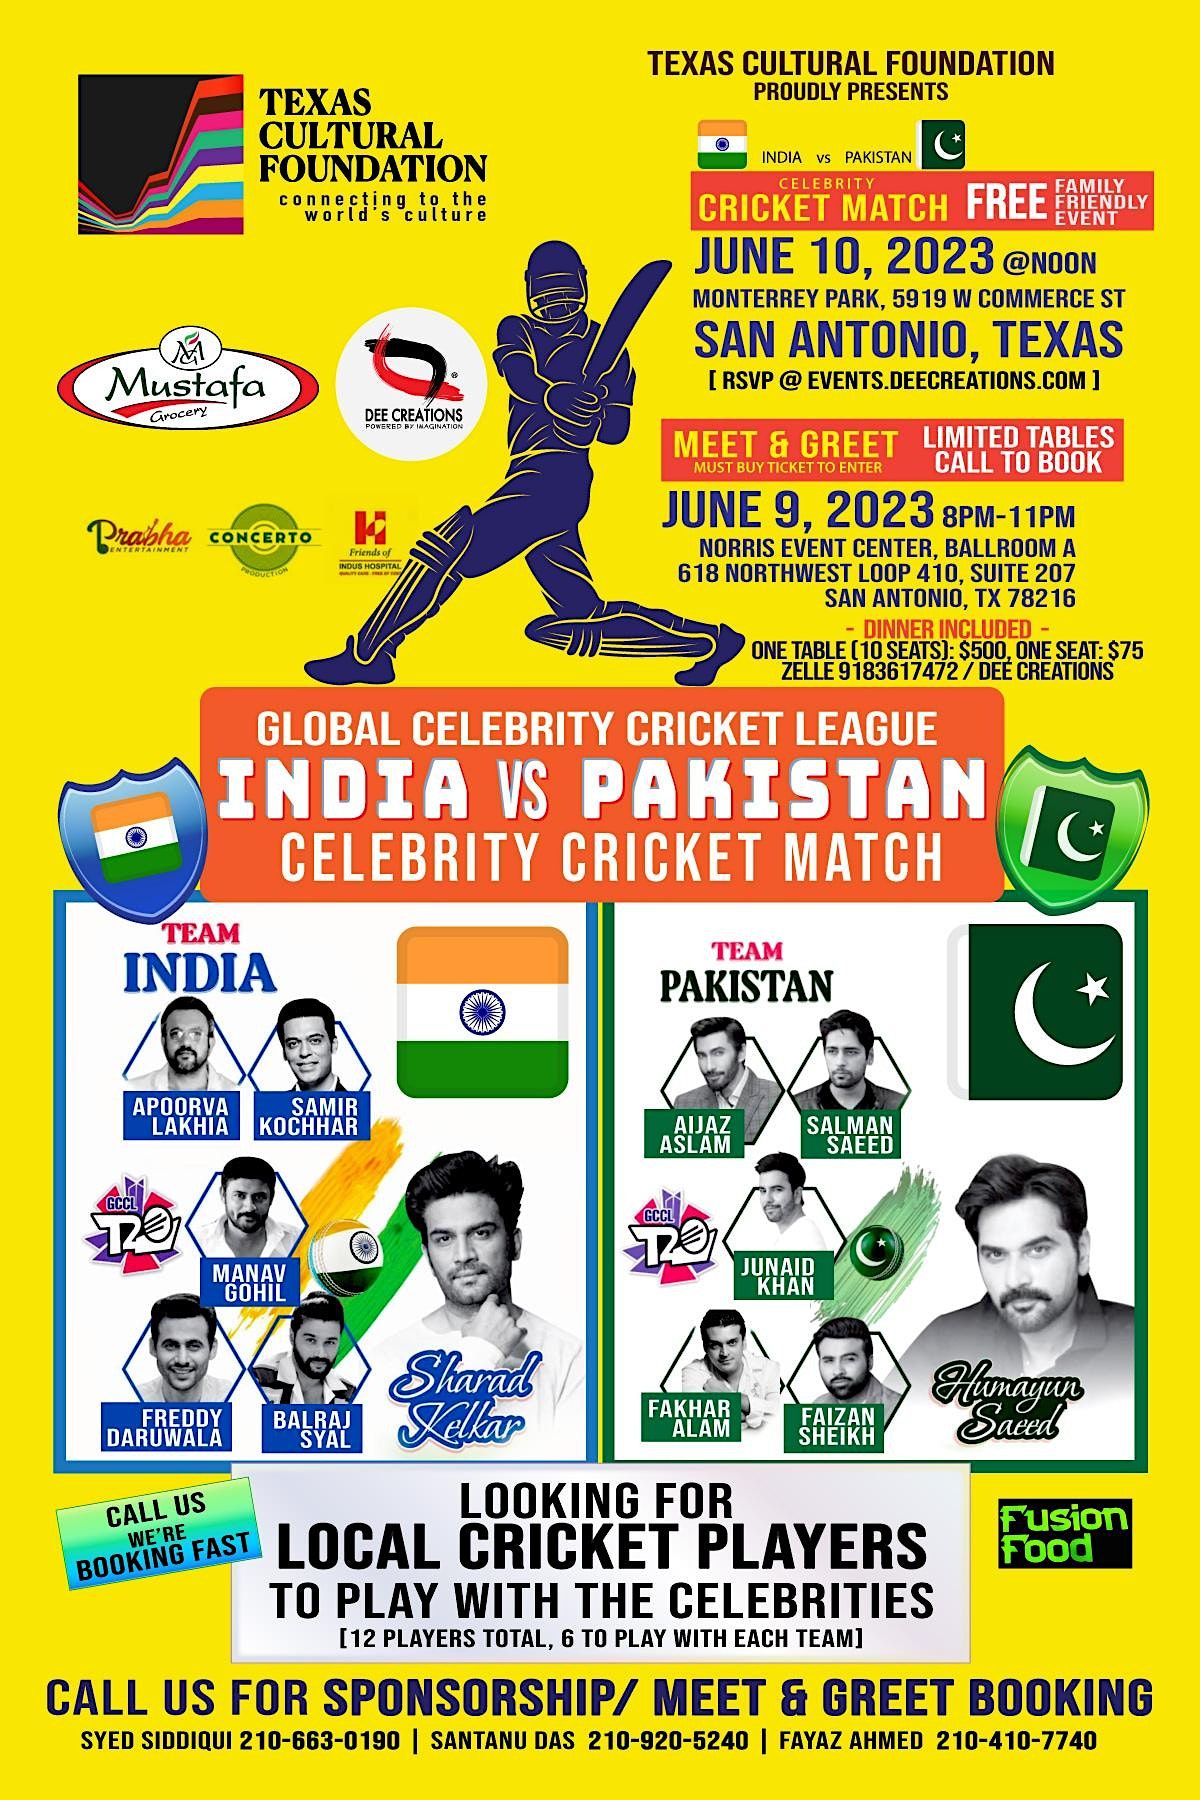 Celebrity Cricket Match between India and Pakistan